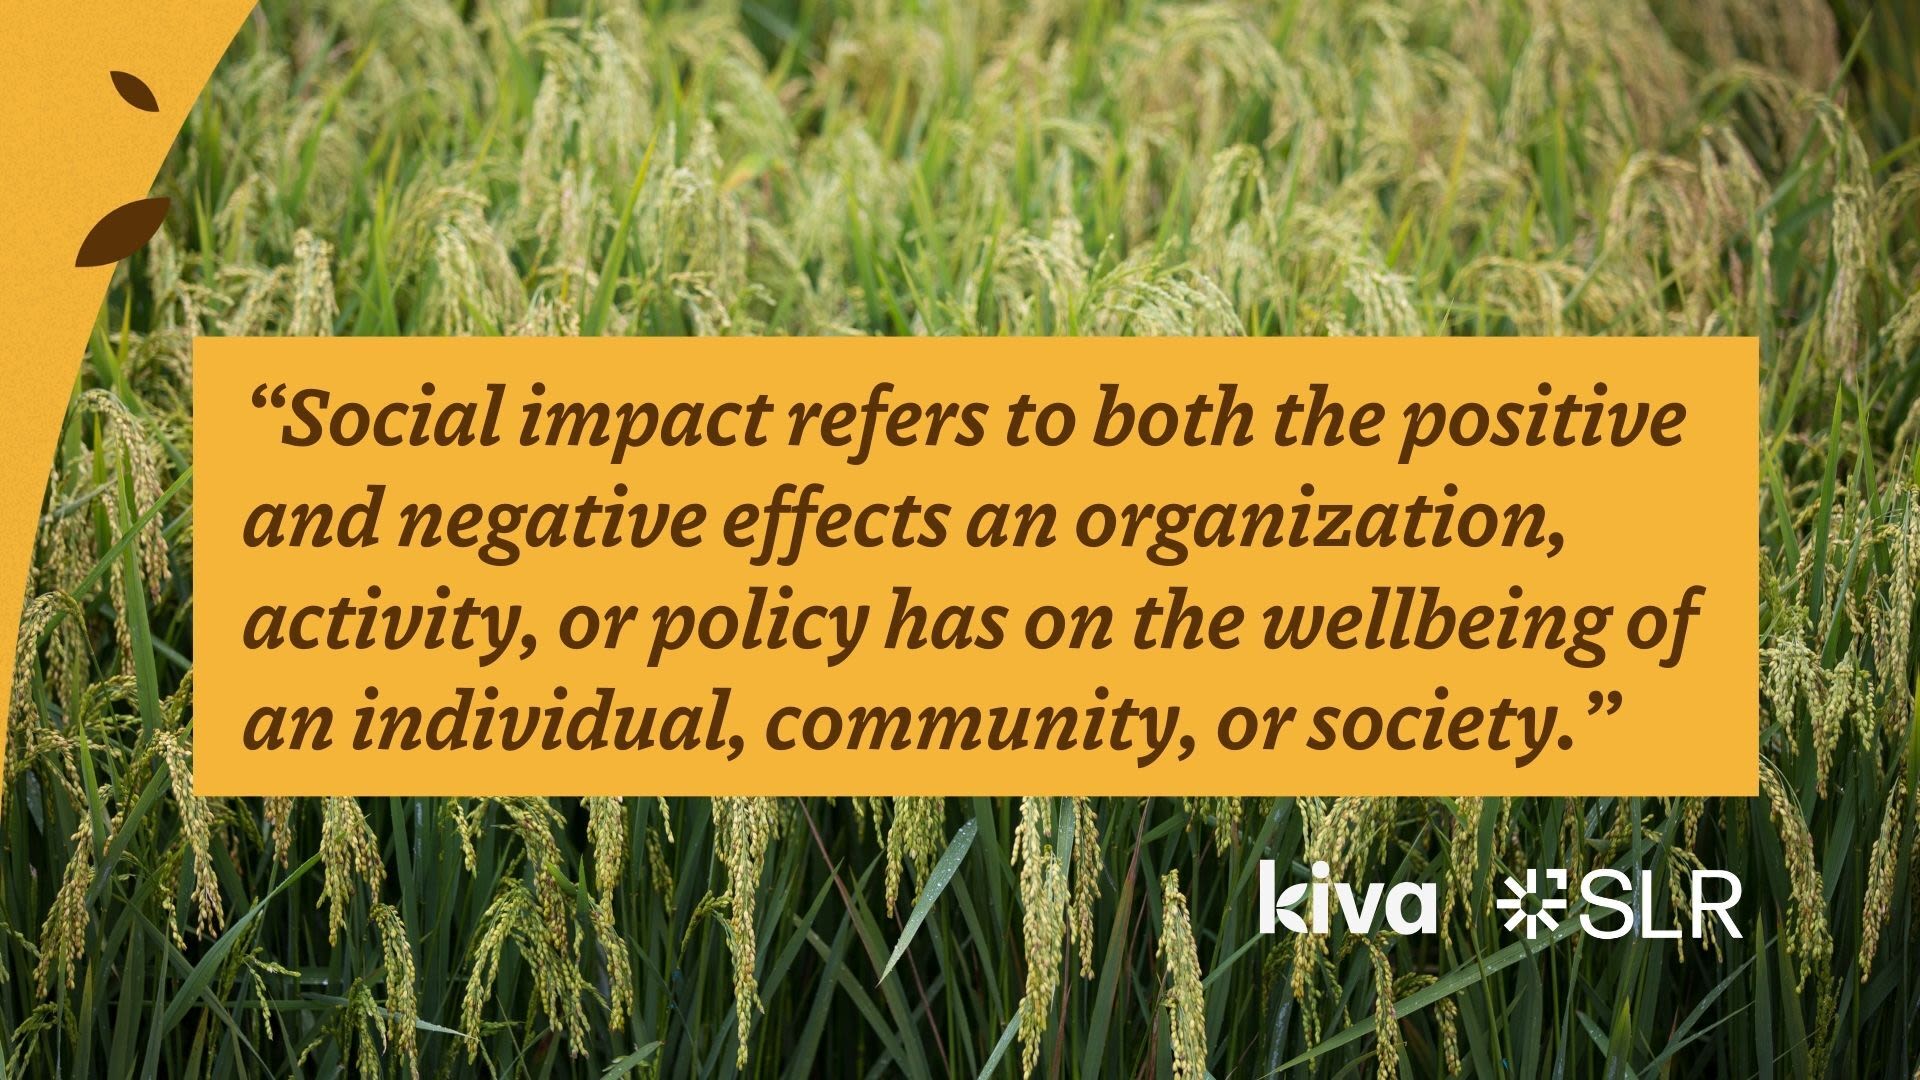 Quote image: "Social impact refers to both the positive and negative effects an organization, activity, or policy has on the wellbeing of an individual, community, or society."